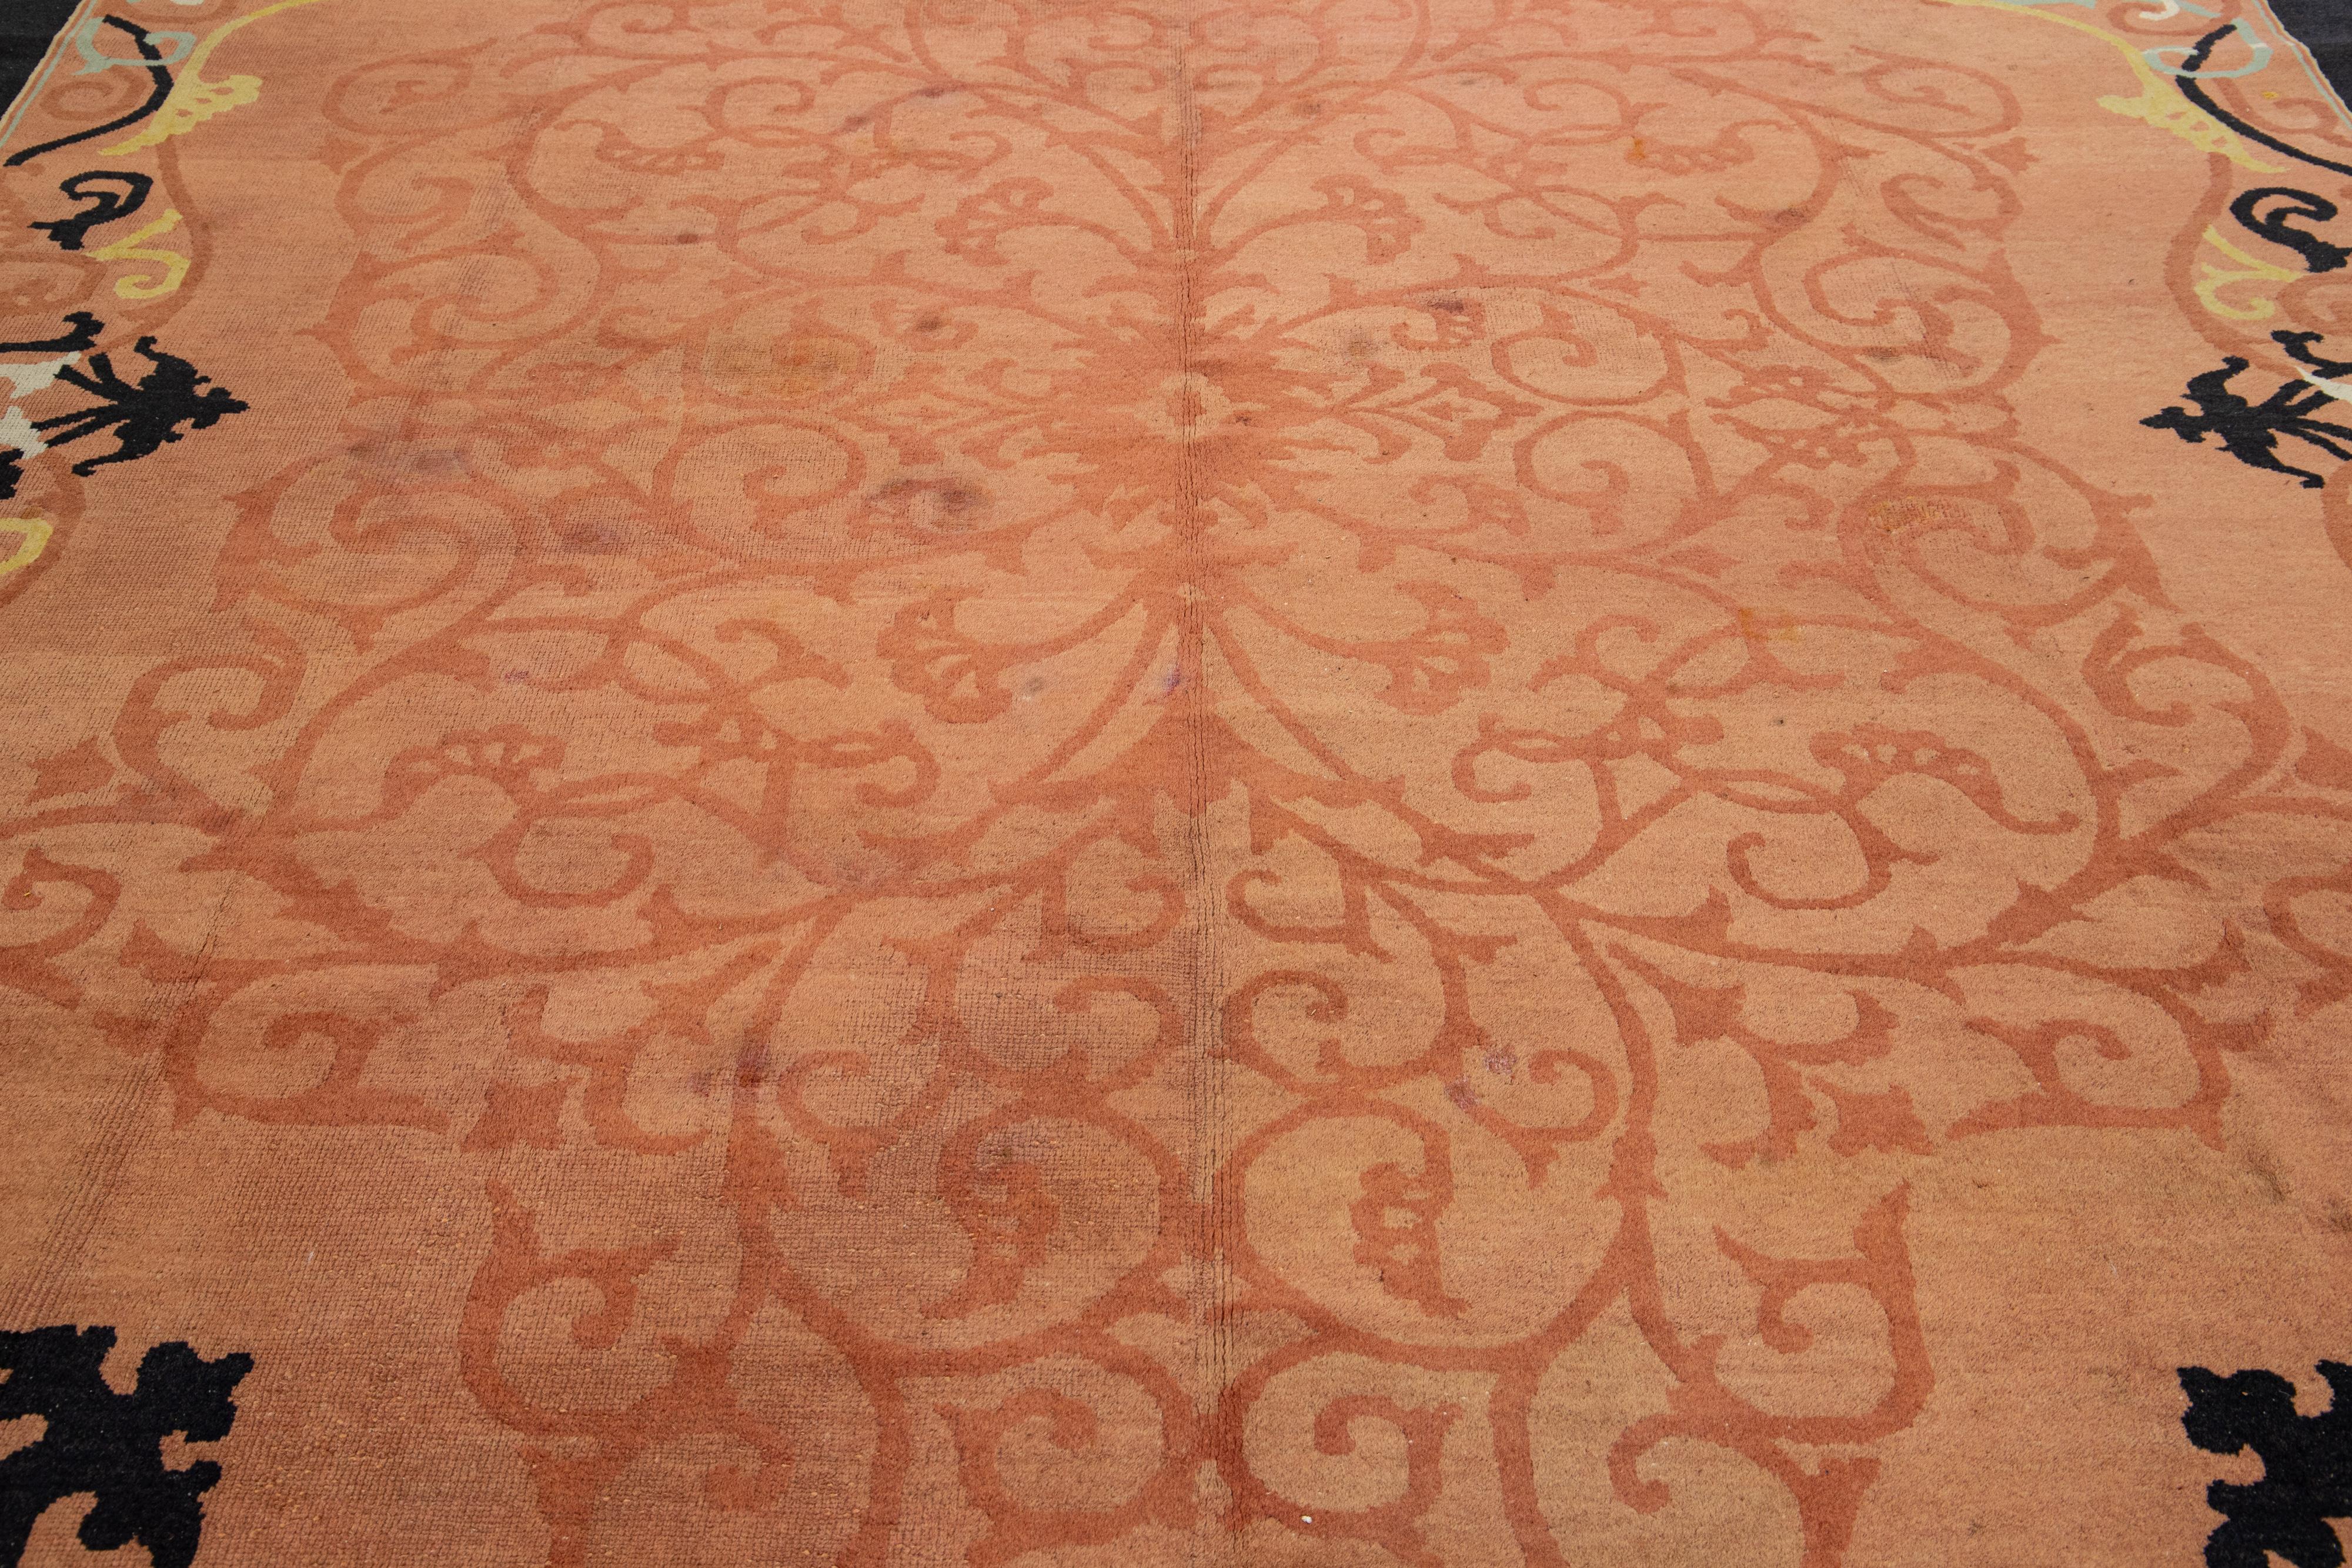 Antique 1920s Chinese Art Deco Rug In Terracota Color with Floral Scroll Pattern For Sale 5